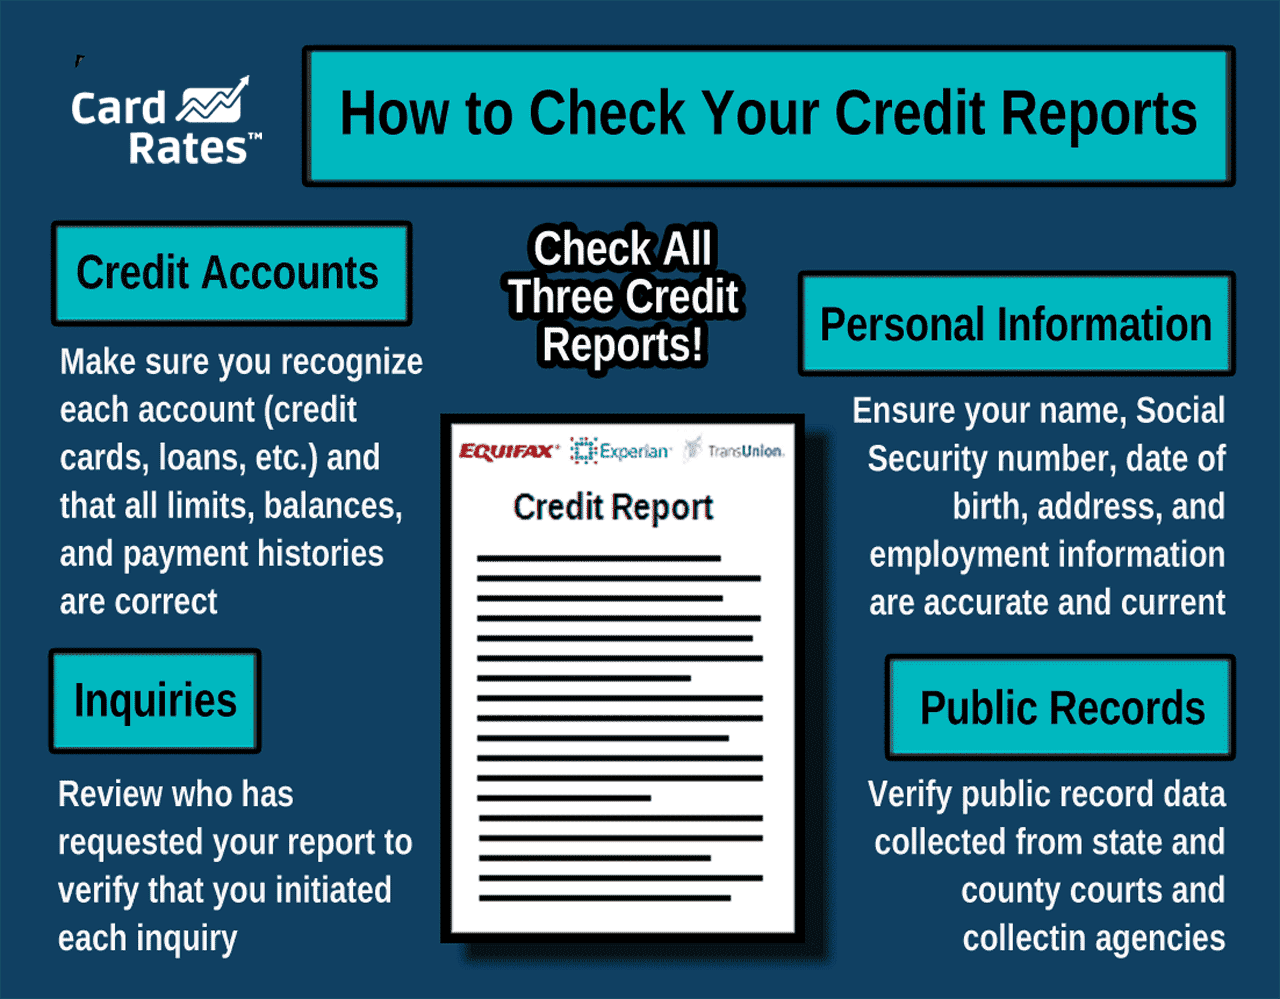 How to check your credit reports.